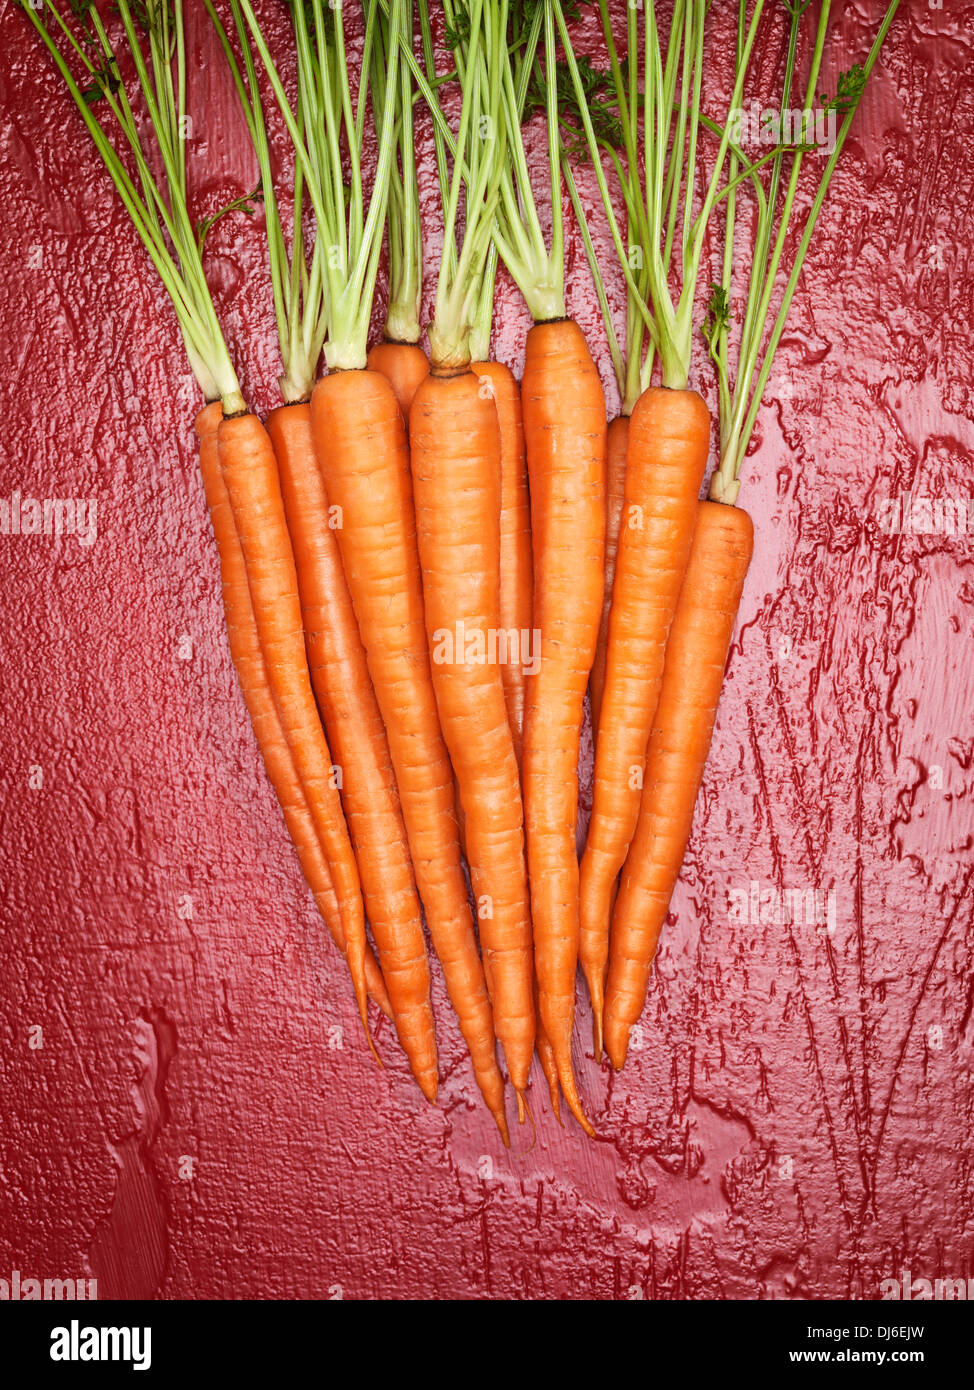 Bunch of juicy orange organic carrots on red background, artistic food still life Stock Photo